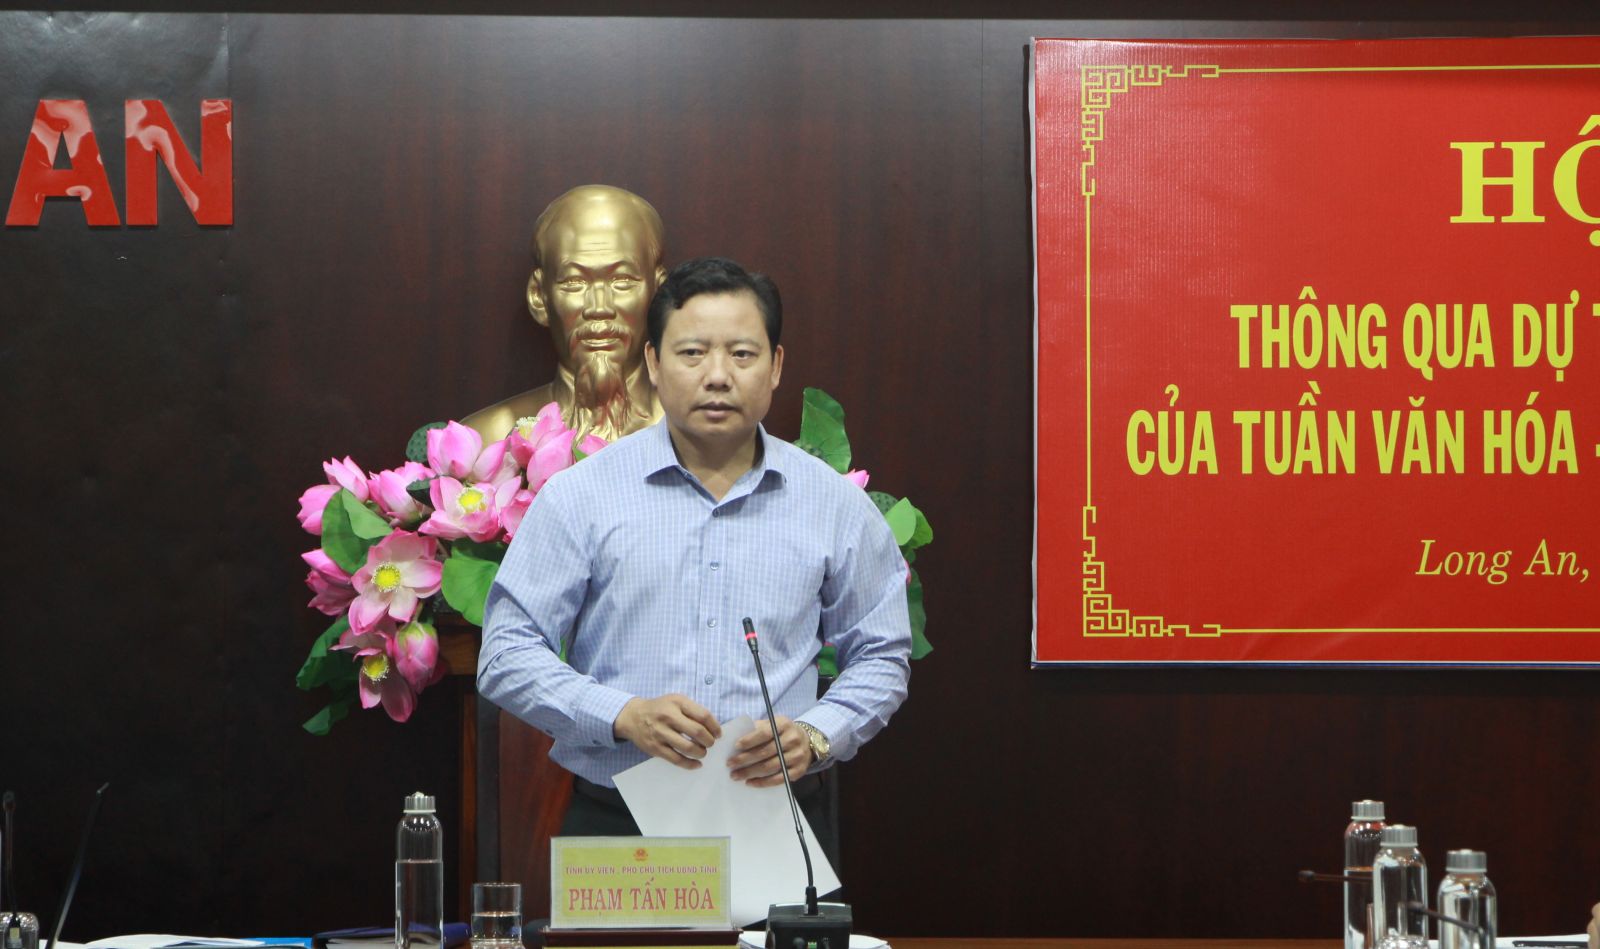 Vice Chairman of the Provincial People's Committee - Pham Tan Hoa requested that the cultural art program of the opening and closing sessions of the event had to solemnly match the theme and content